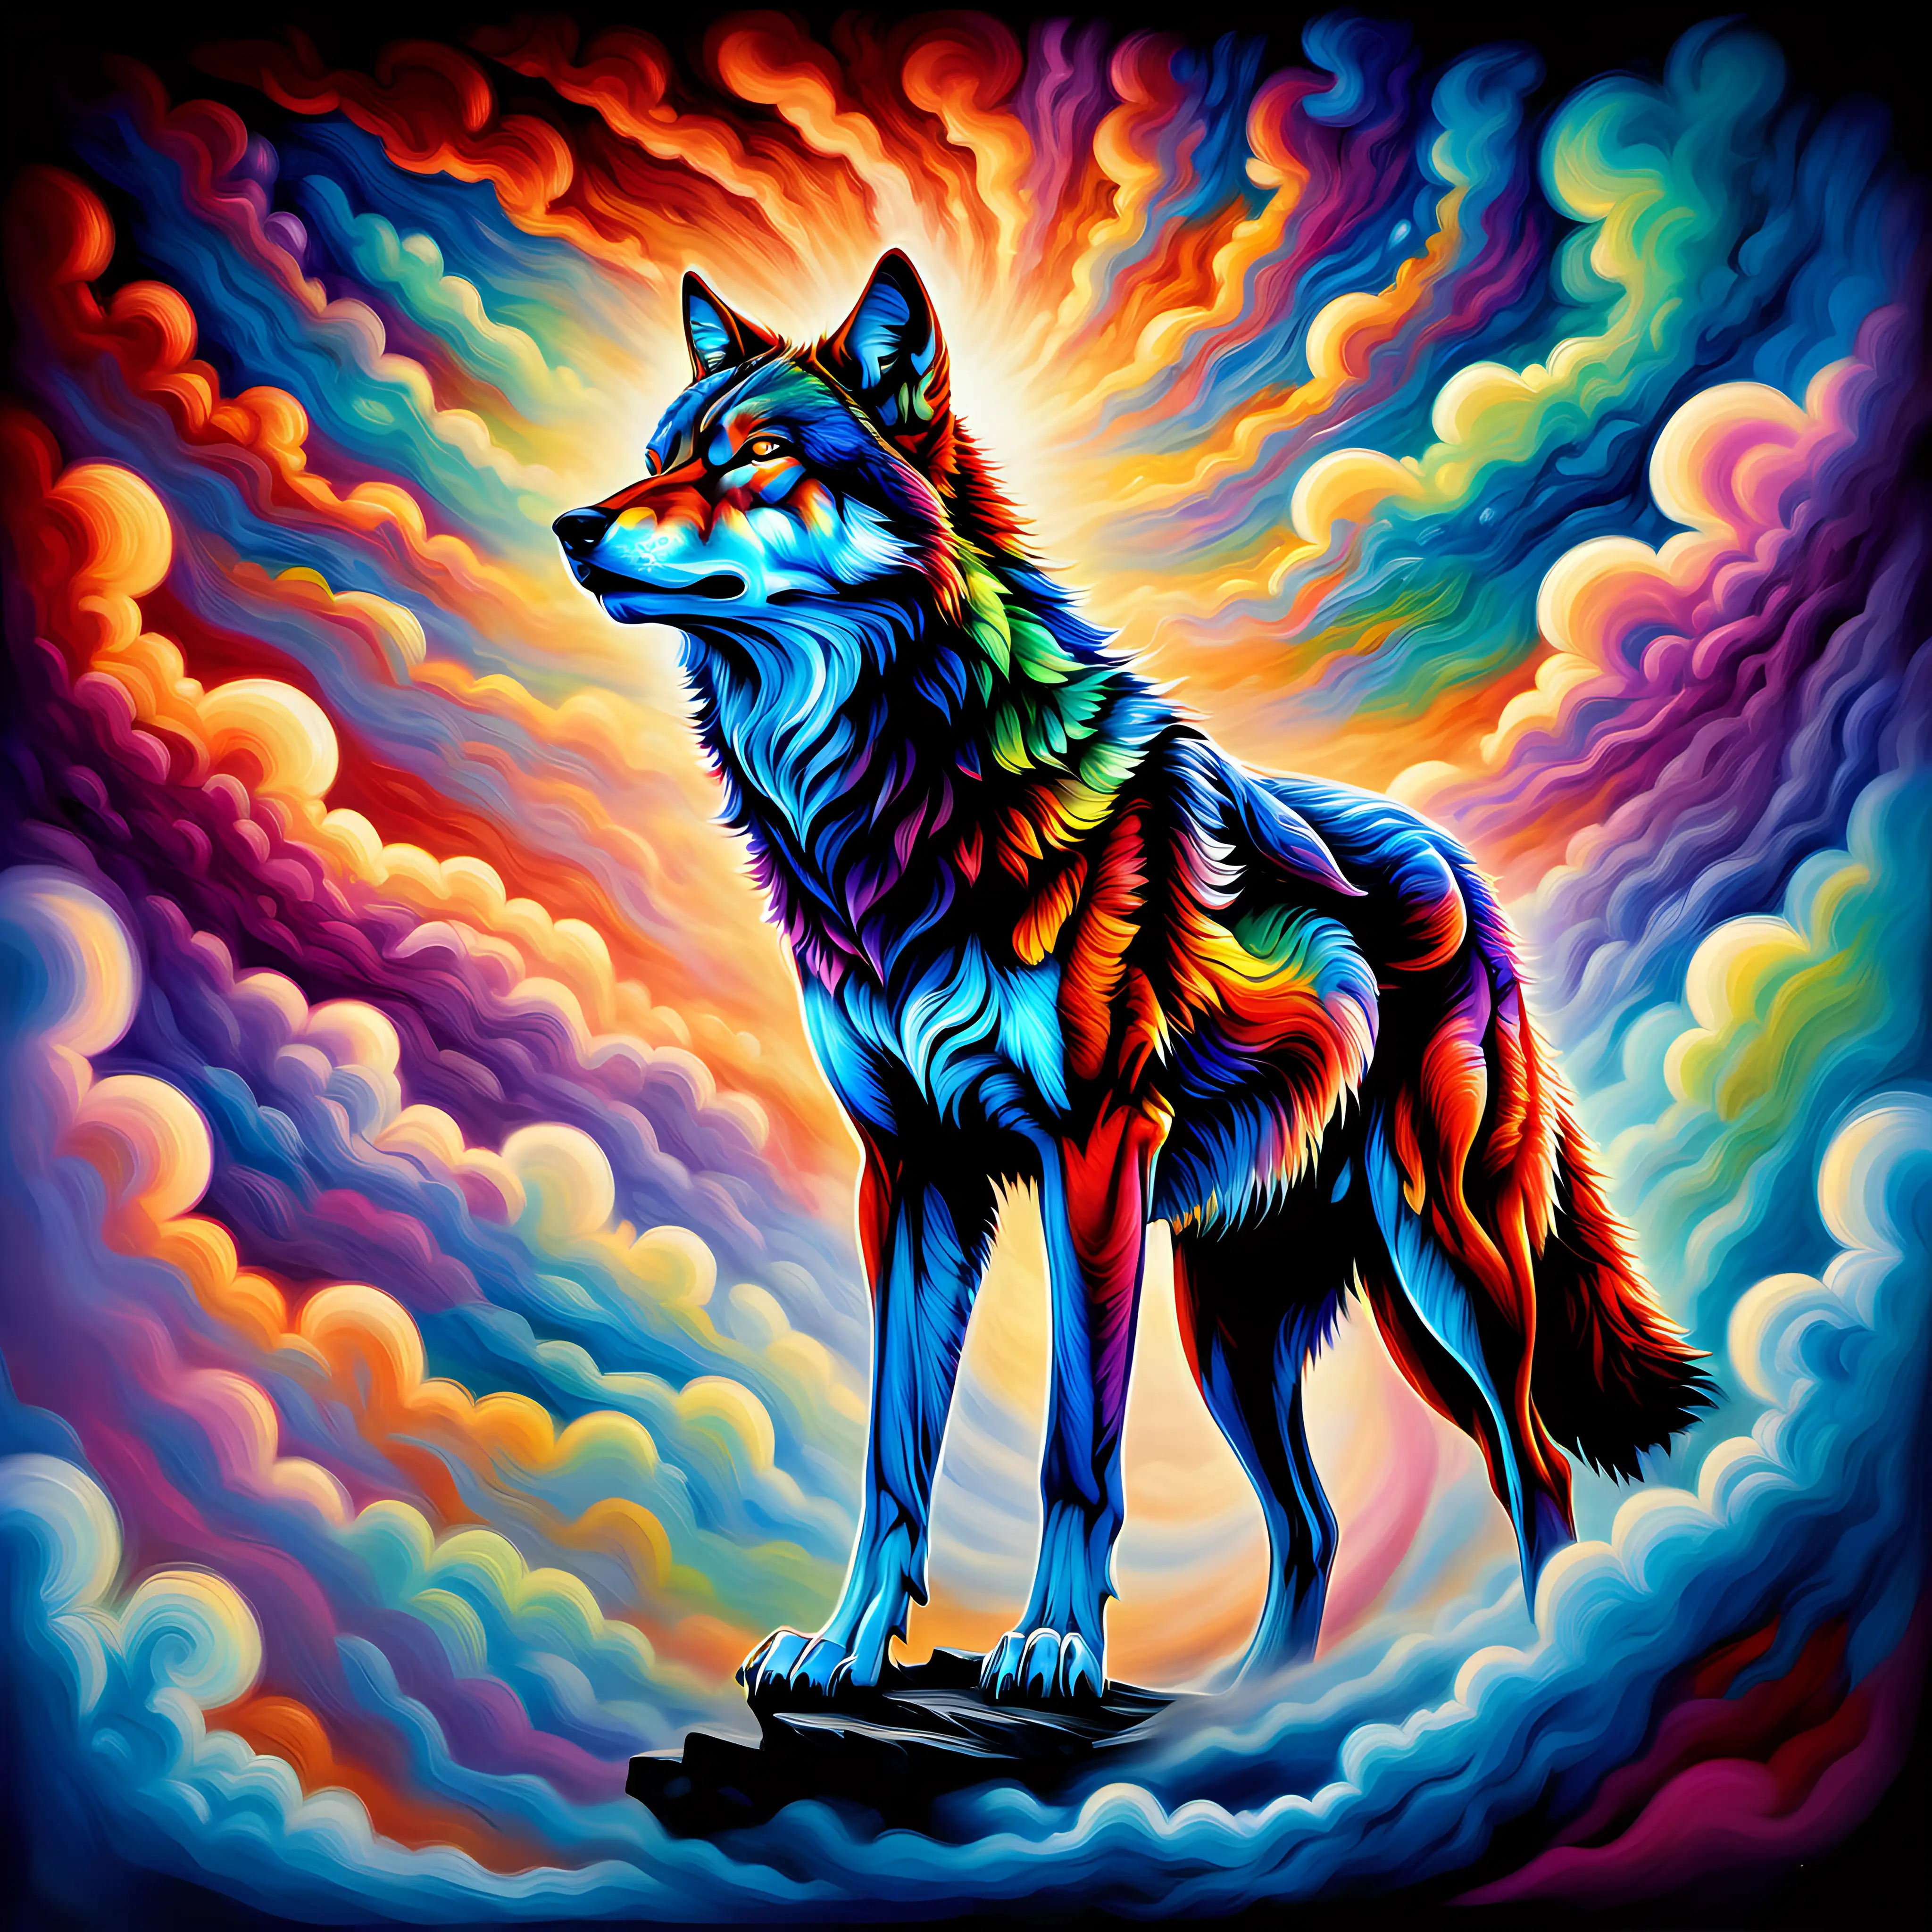 Imagine a breathtaking scene where a vibrant, multi-hued wolf emerges from a canvas of swirling, iridescent clouds. The wolf's form is vividly painted with a palette of vibrant colors, emanating an aura of raw power and strength amidst the ever-shifting, kaleidoscopic clouds that surround it. Capture the essence of this majestic creature as it stands as a symbol of primal force and beauty within the mesmerizing, colorful expanse of the sky.